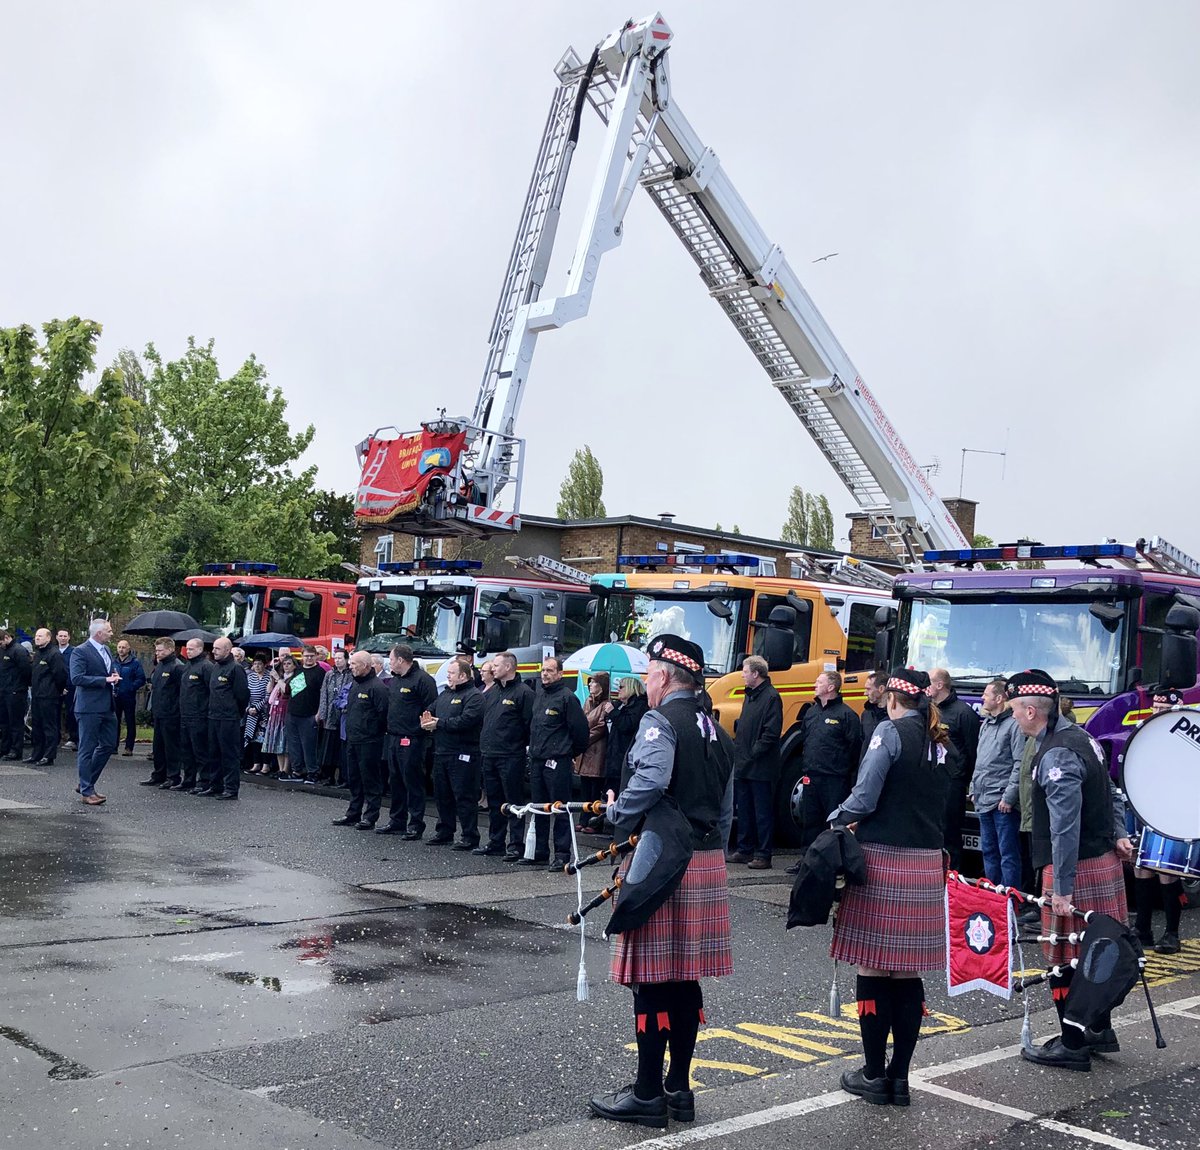 Brigade Secretary Gavin Marshall speaking to crews, members of the Fire Authority and members of the public at Calvert Lane Fire Station. A big thank you to the FBU Pipe Band.
#FirefighterMemorialDay #FBU